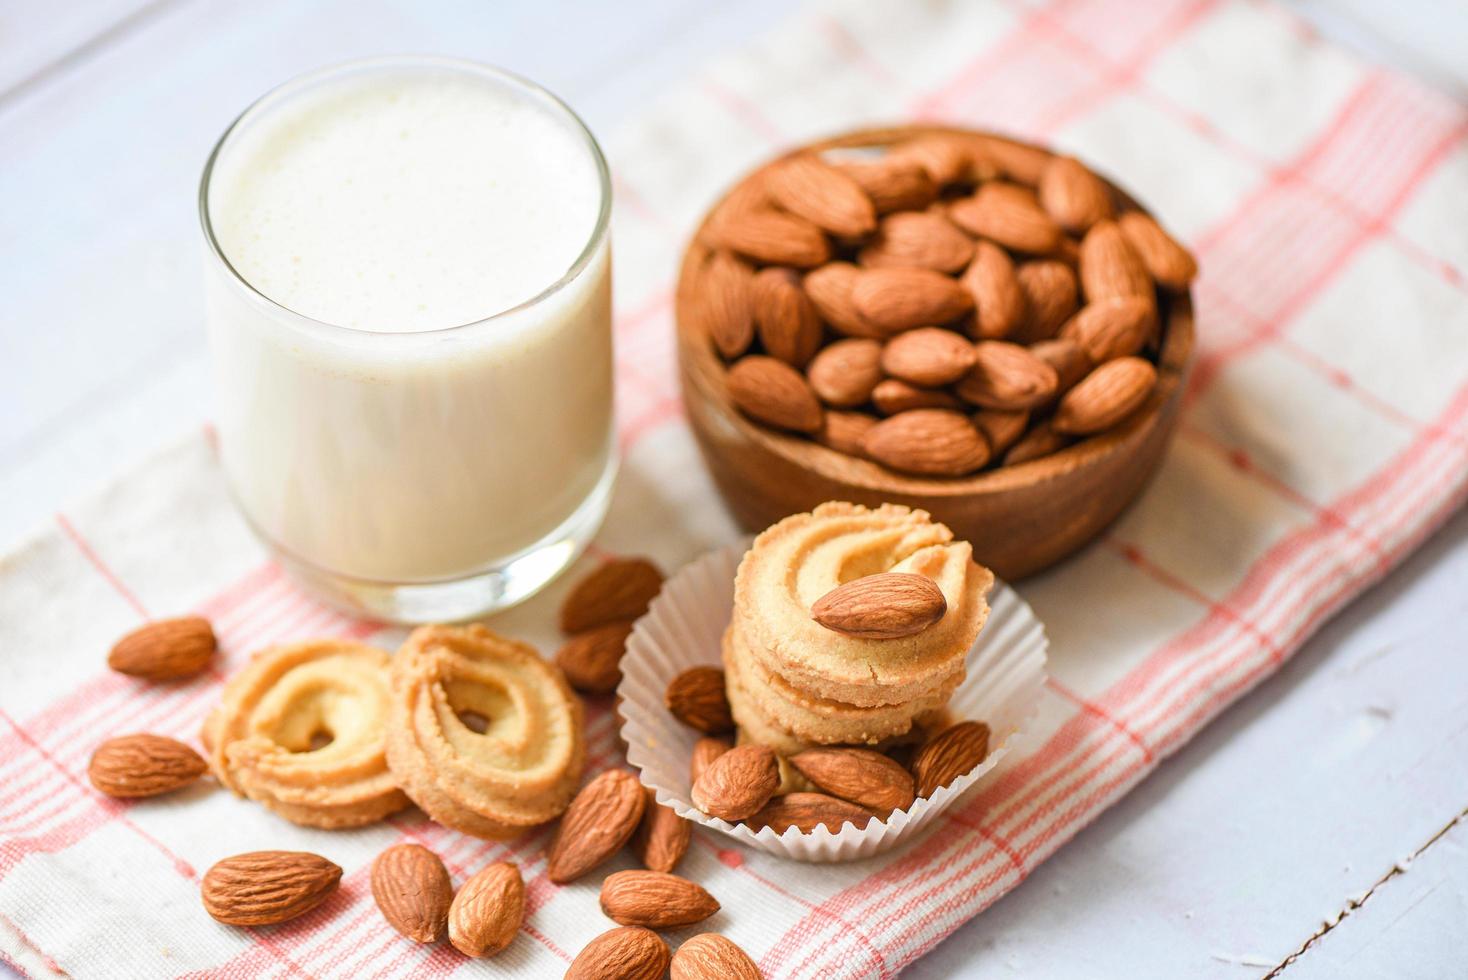 almond milk glass and cookie for breakfast health food - almonds nuts on wooden bowl background photo